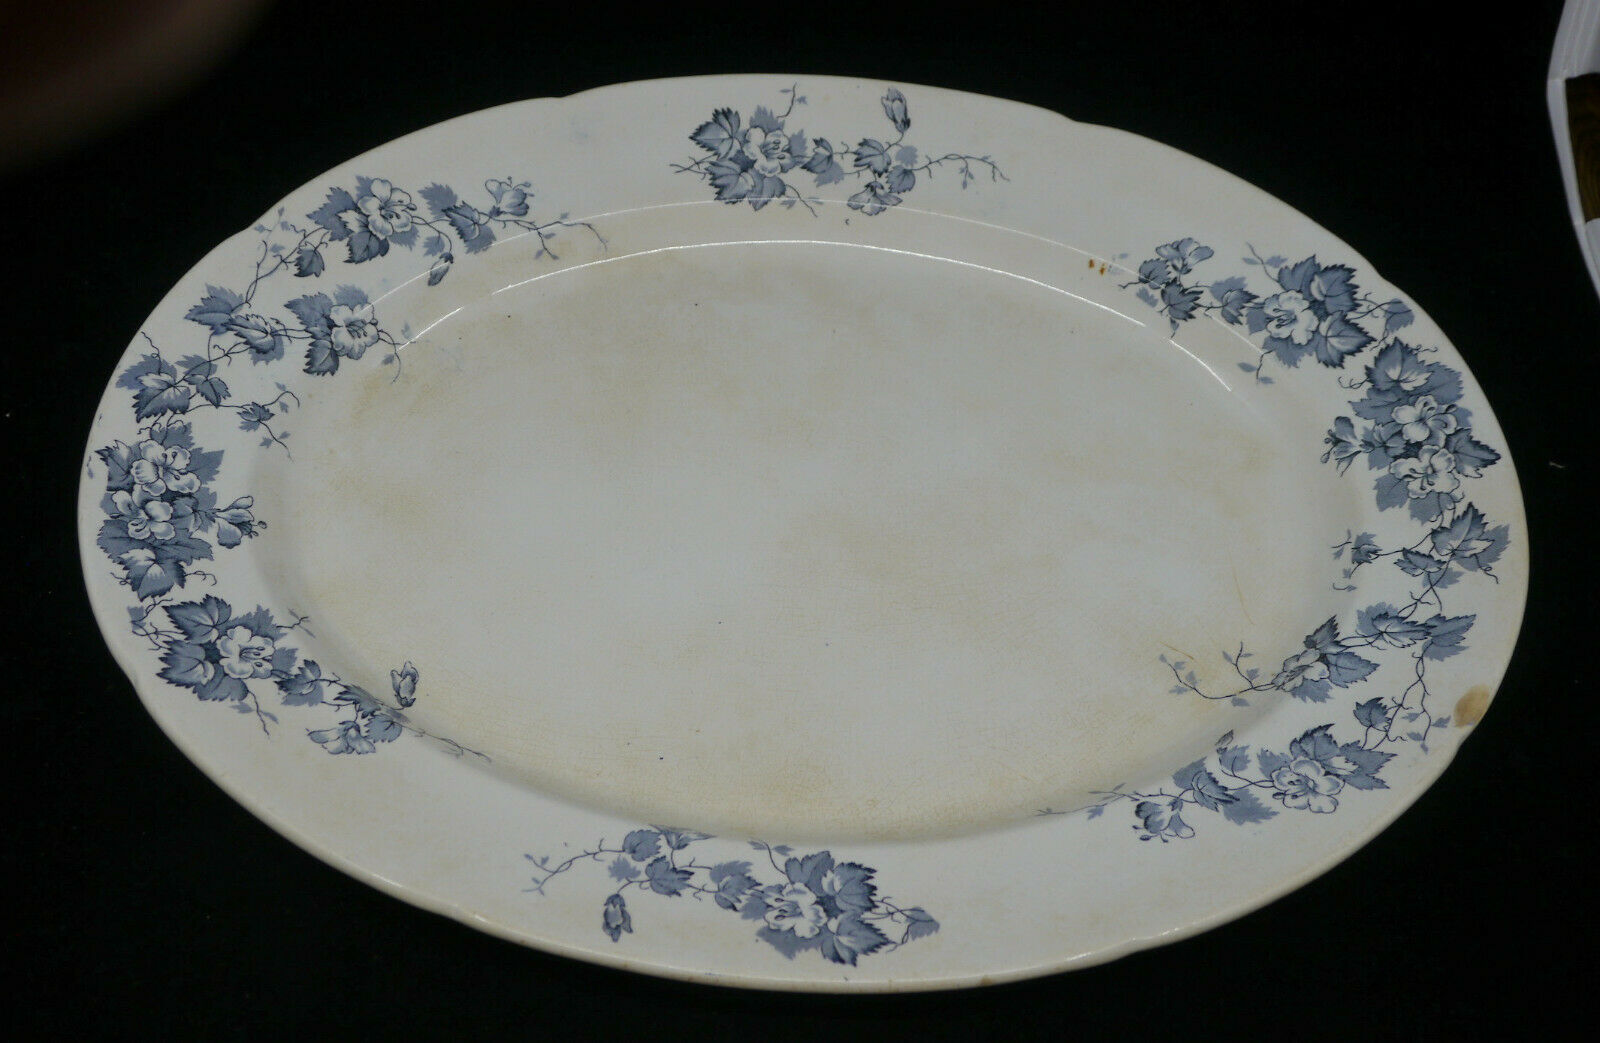 Antique Blue & White Transferware Oval Serving Platter, 16.5 Inches, Ironstone?